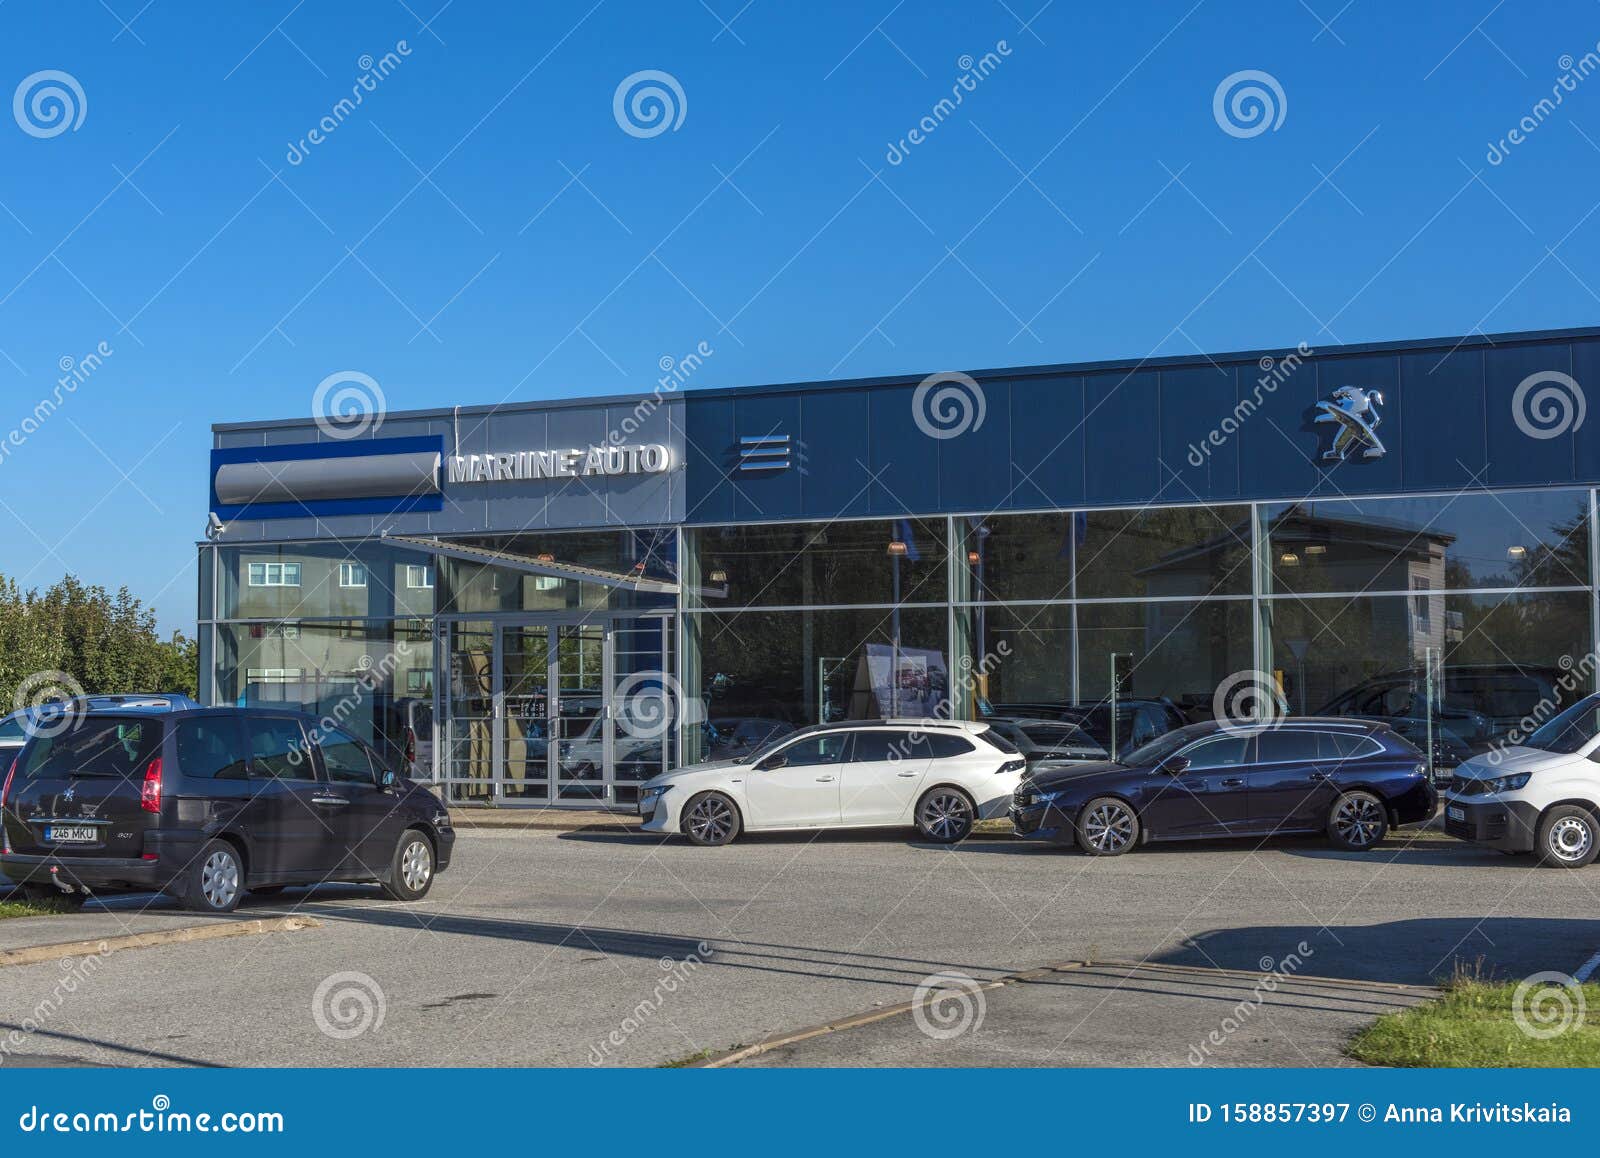 Peugeot Car Dealership And Cars In Front Of It Editorial